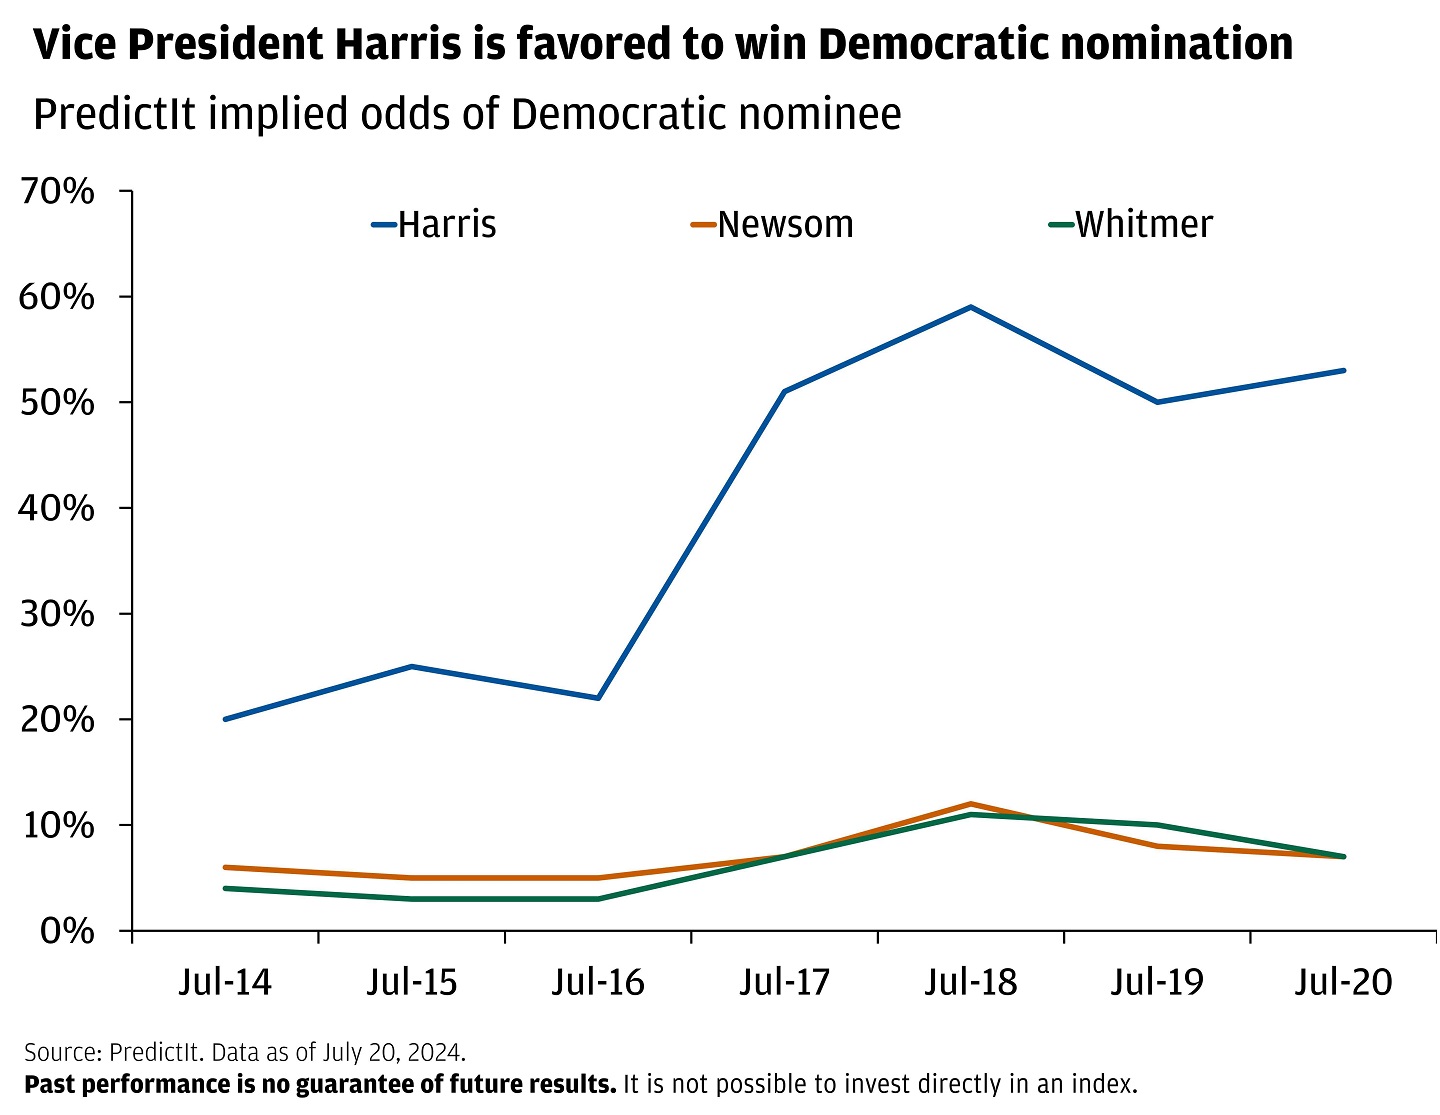 This chart shows PredictIt betting market implied odds to win the 2024 Democratic Presidential election for Kamala Harris, Gavin Newsom, and Gretchen Whitmer.